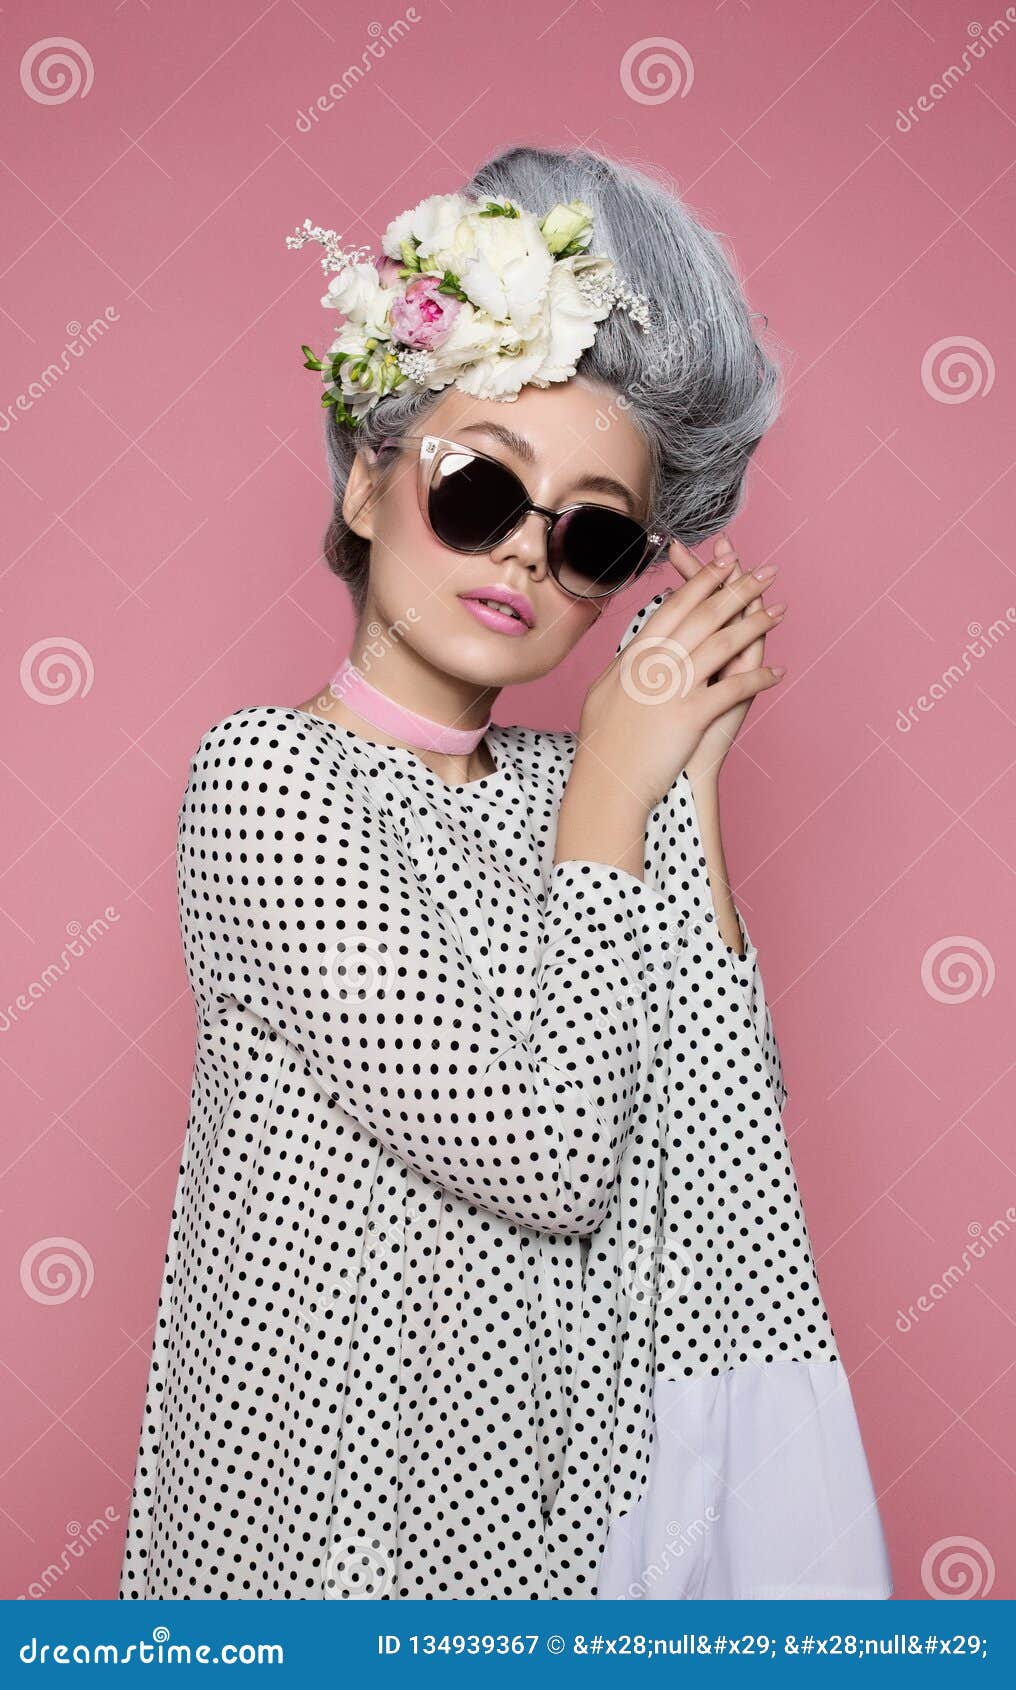 close up beauty portrait in barocco style in polka-dot dress. fashion bright pink studio background